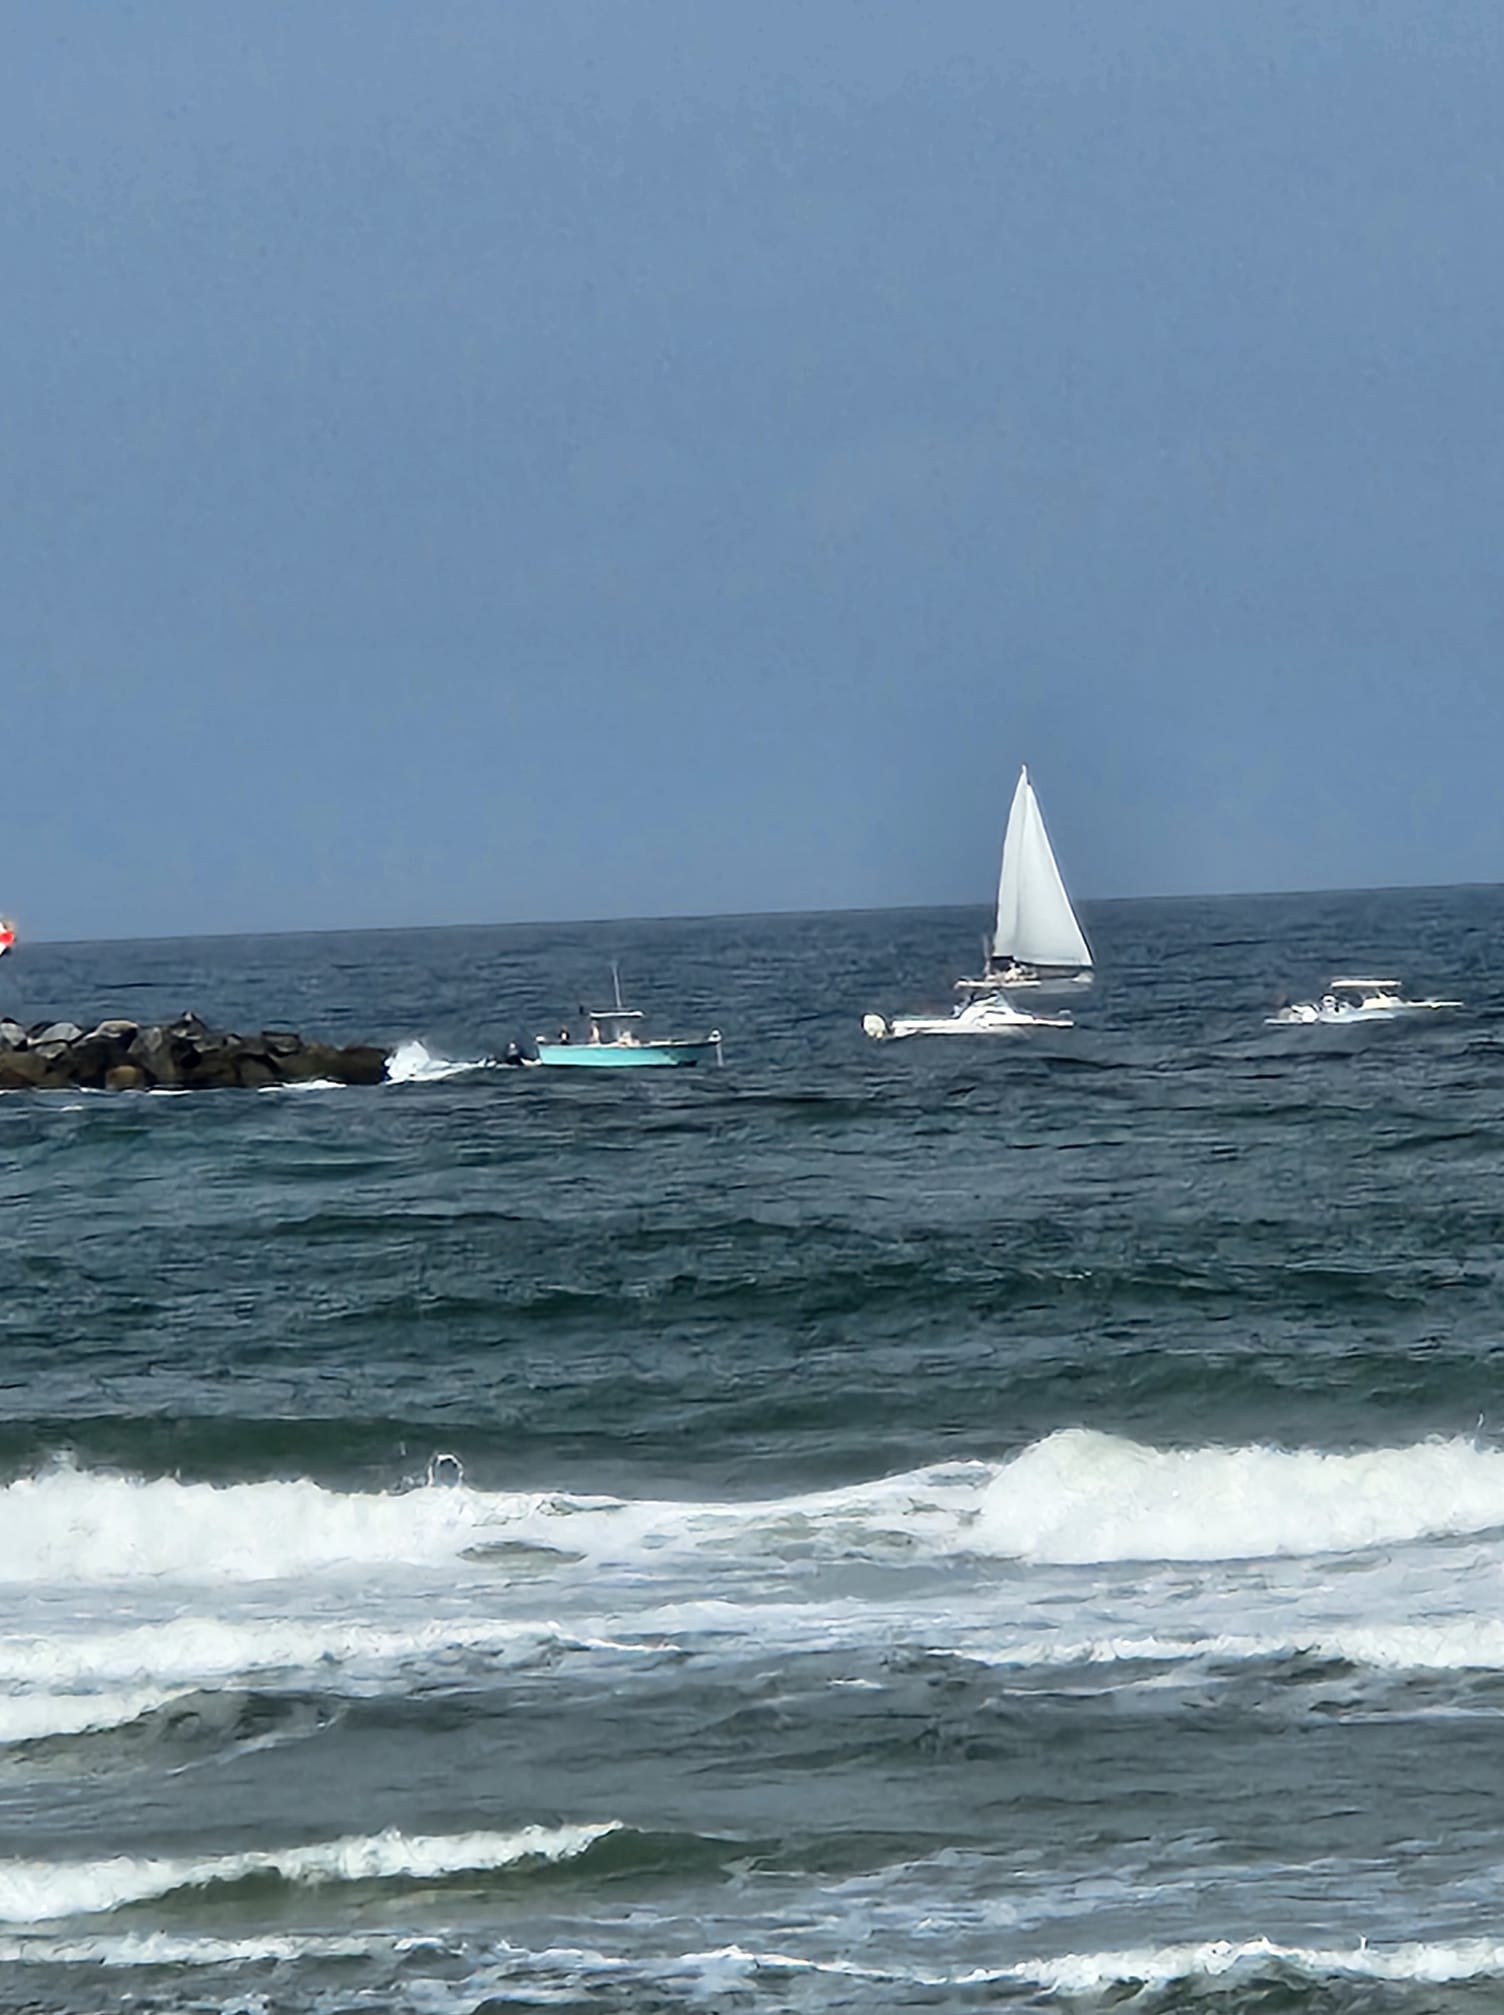 A group of sailboats in the ocean near a rocky shore.